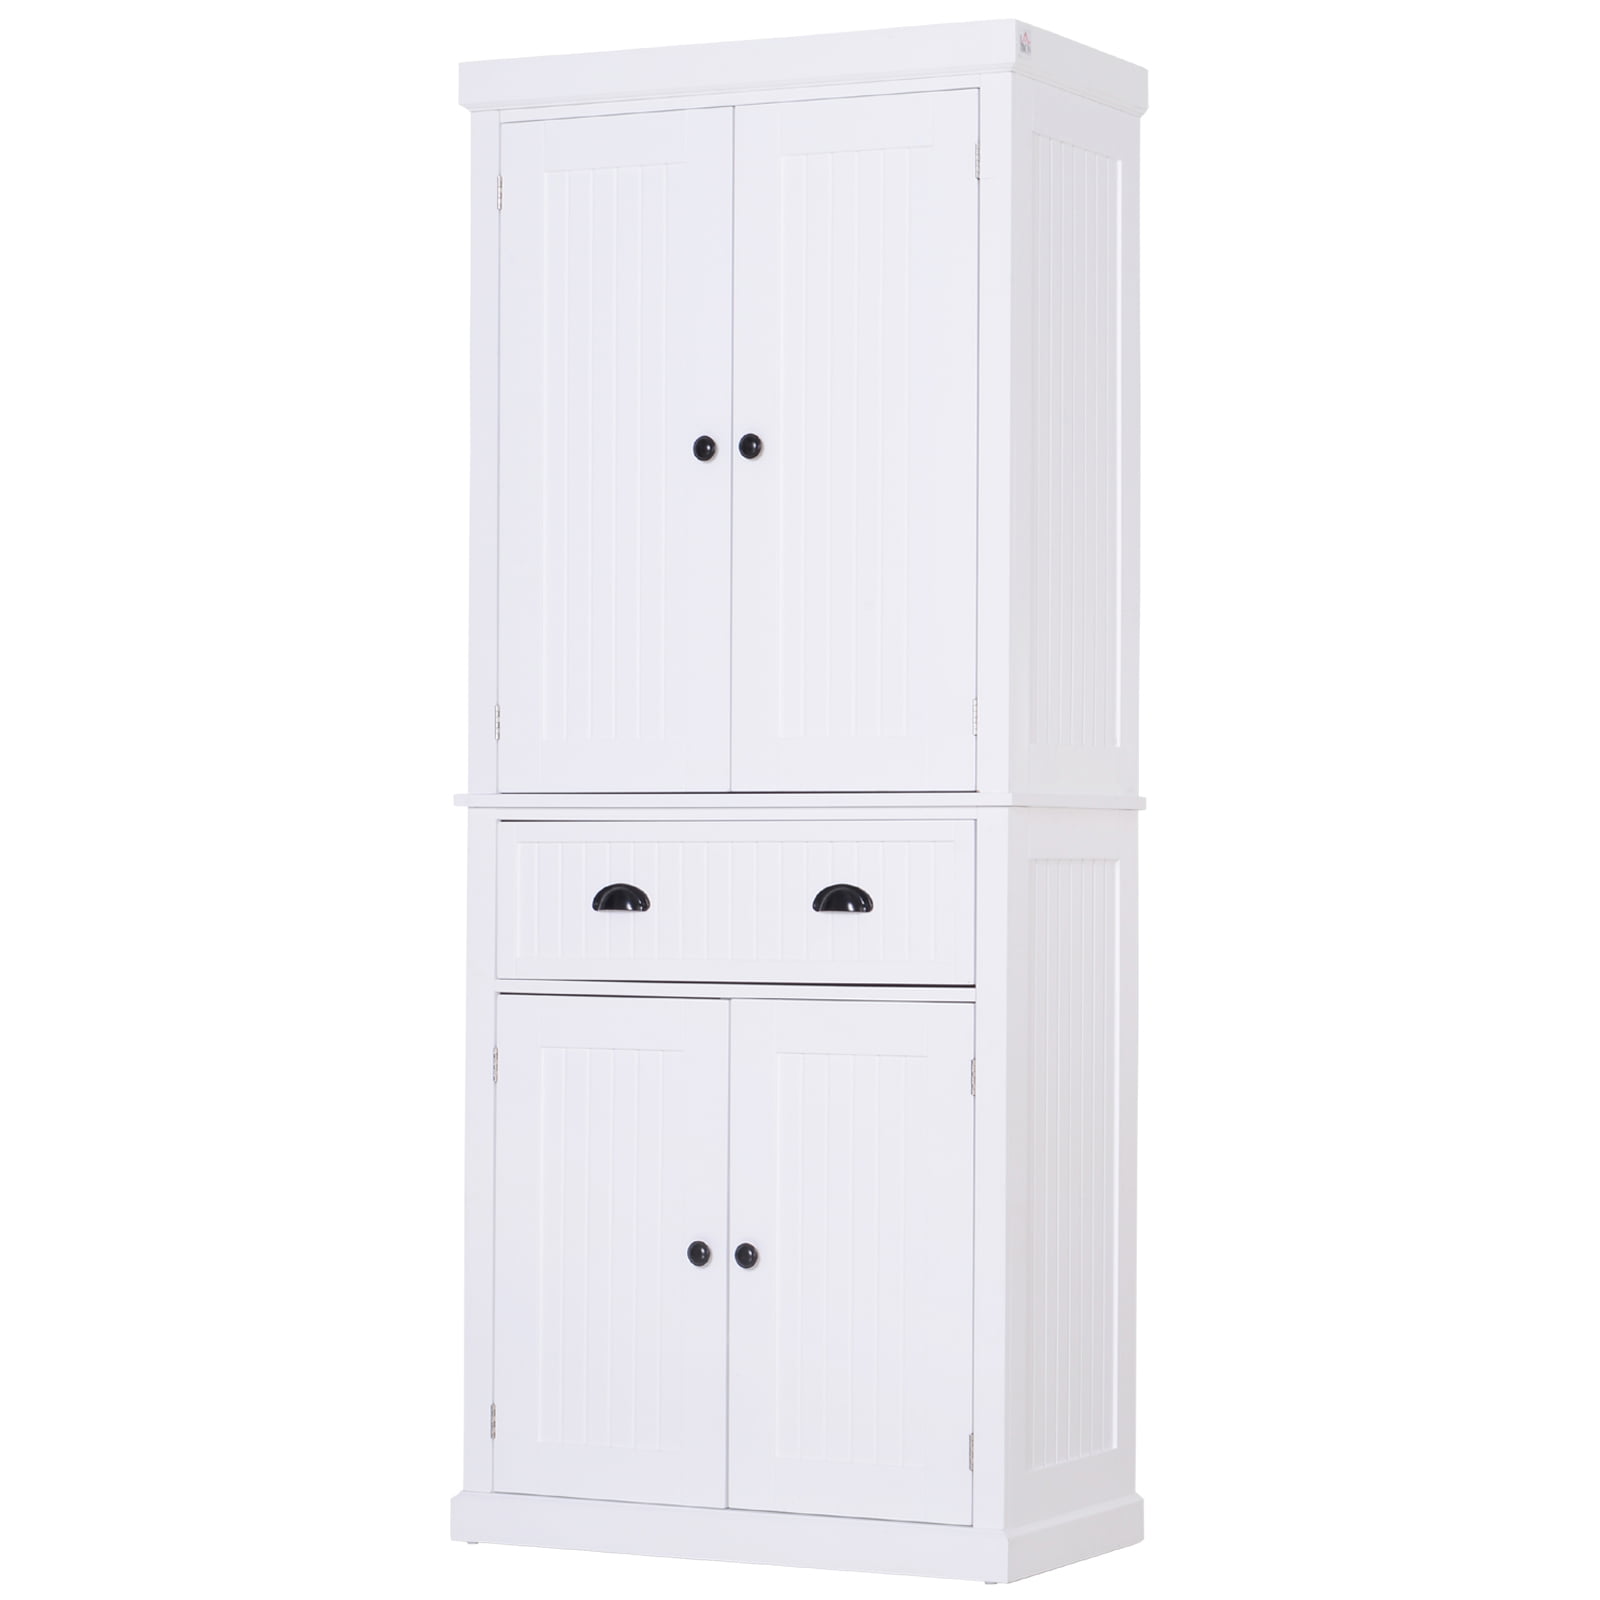 HOMCOM Tall 72" Traditional Colonial Style Standing Kitchen Pantry Cupboard Cabinet - White ...